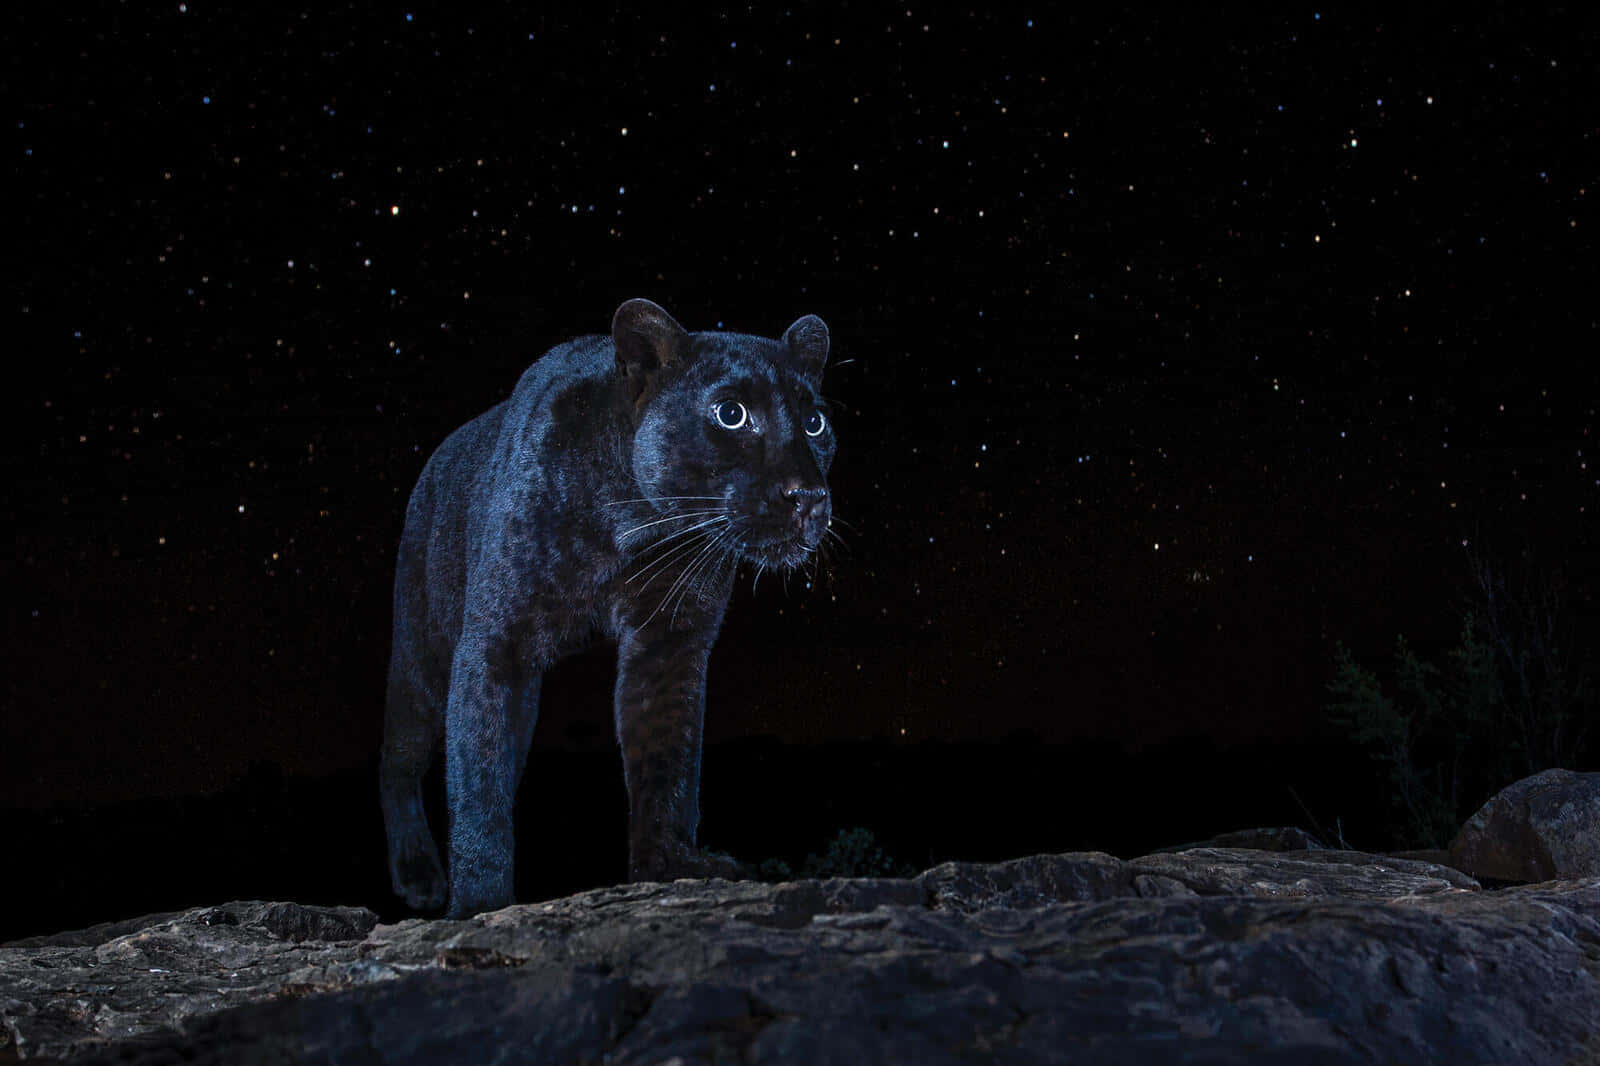 Majestic Black Panther Prowling in its Natural Habitat